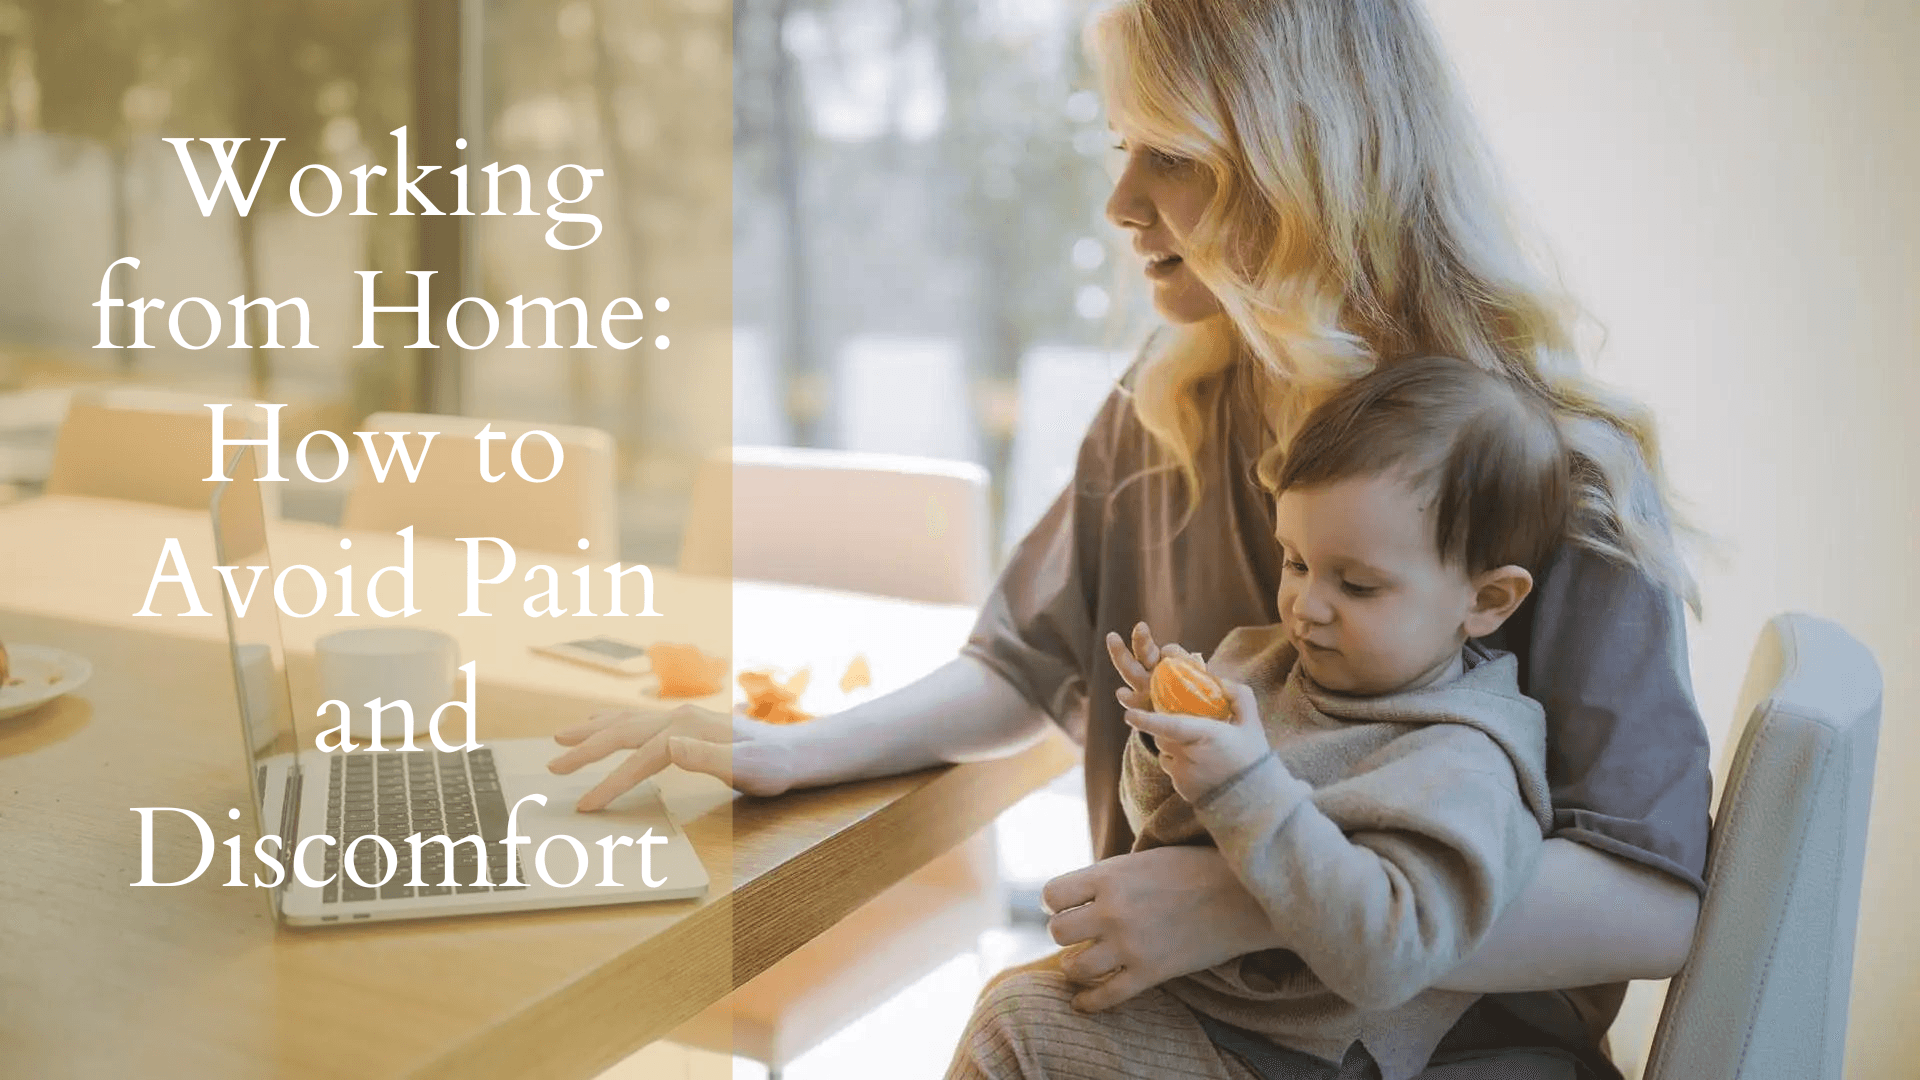 Working from Home: How to Avoid Pain and Discomfort